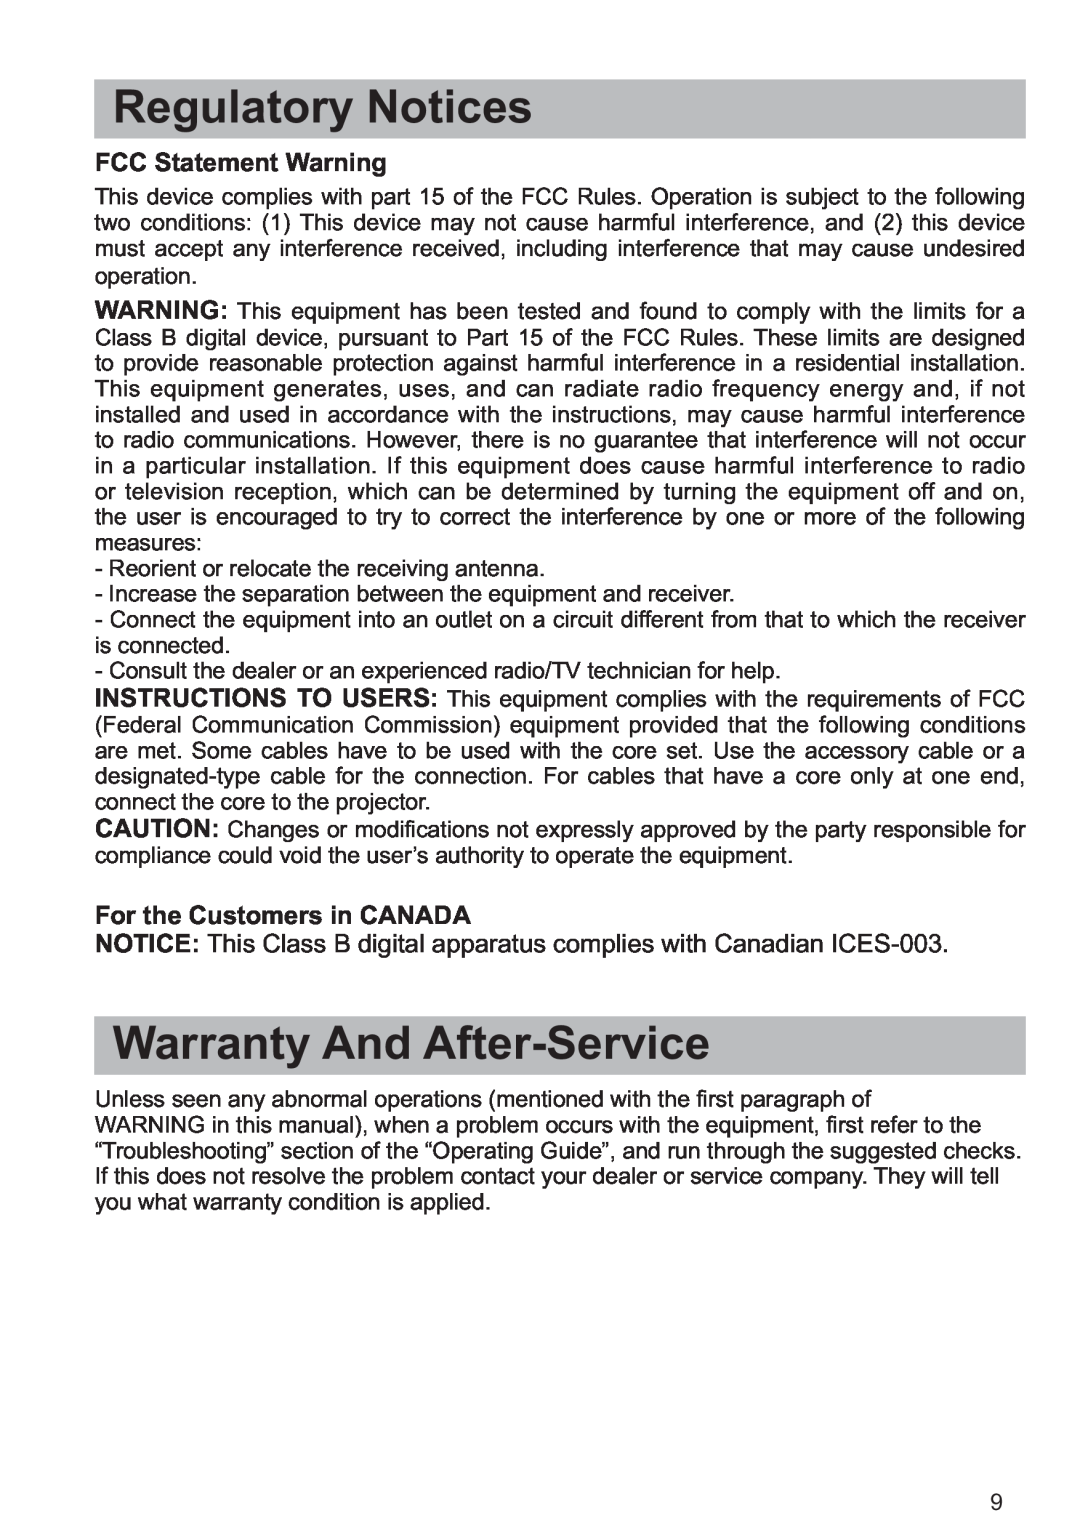 Hitachi CP-X809W Regulatory Notices, Warranty And After-Service, FCC Statement Warning, For the Customers in CANADA 